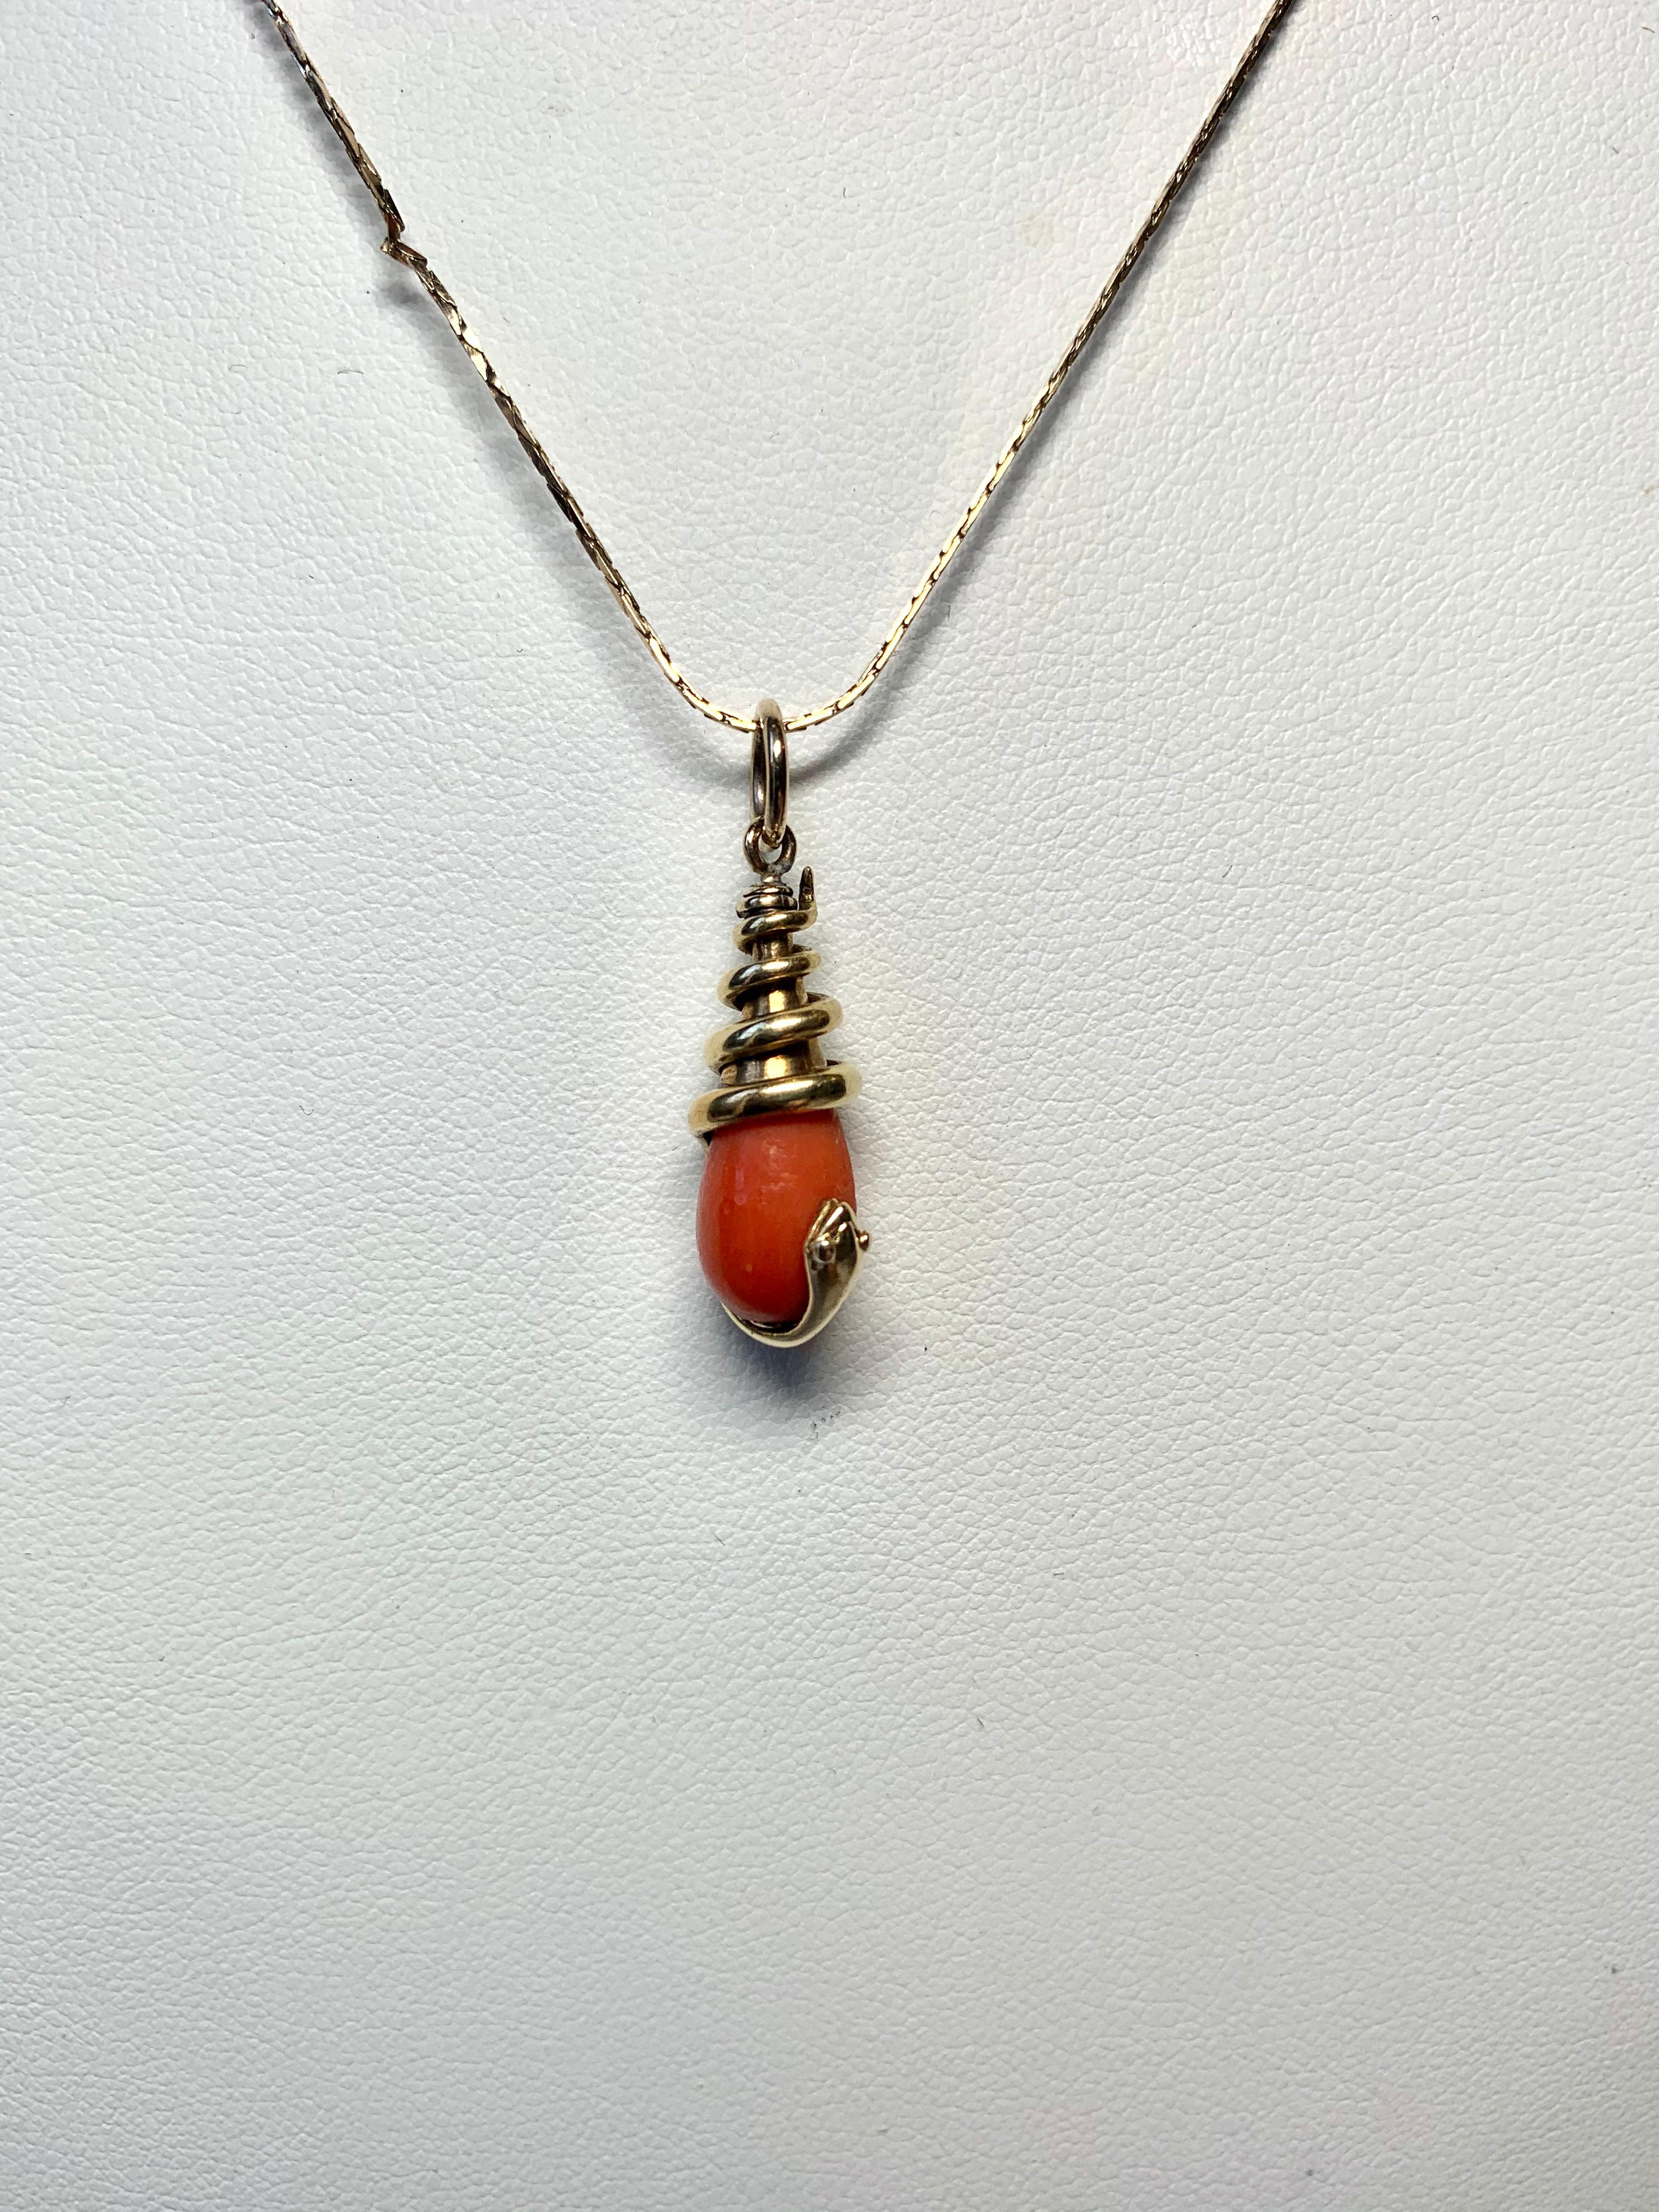 Victorian Coral Snake Pendant Necklace Antique 14 Karat Gold 1800s Rare In Good Condition For Sale In New York, NY